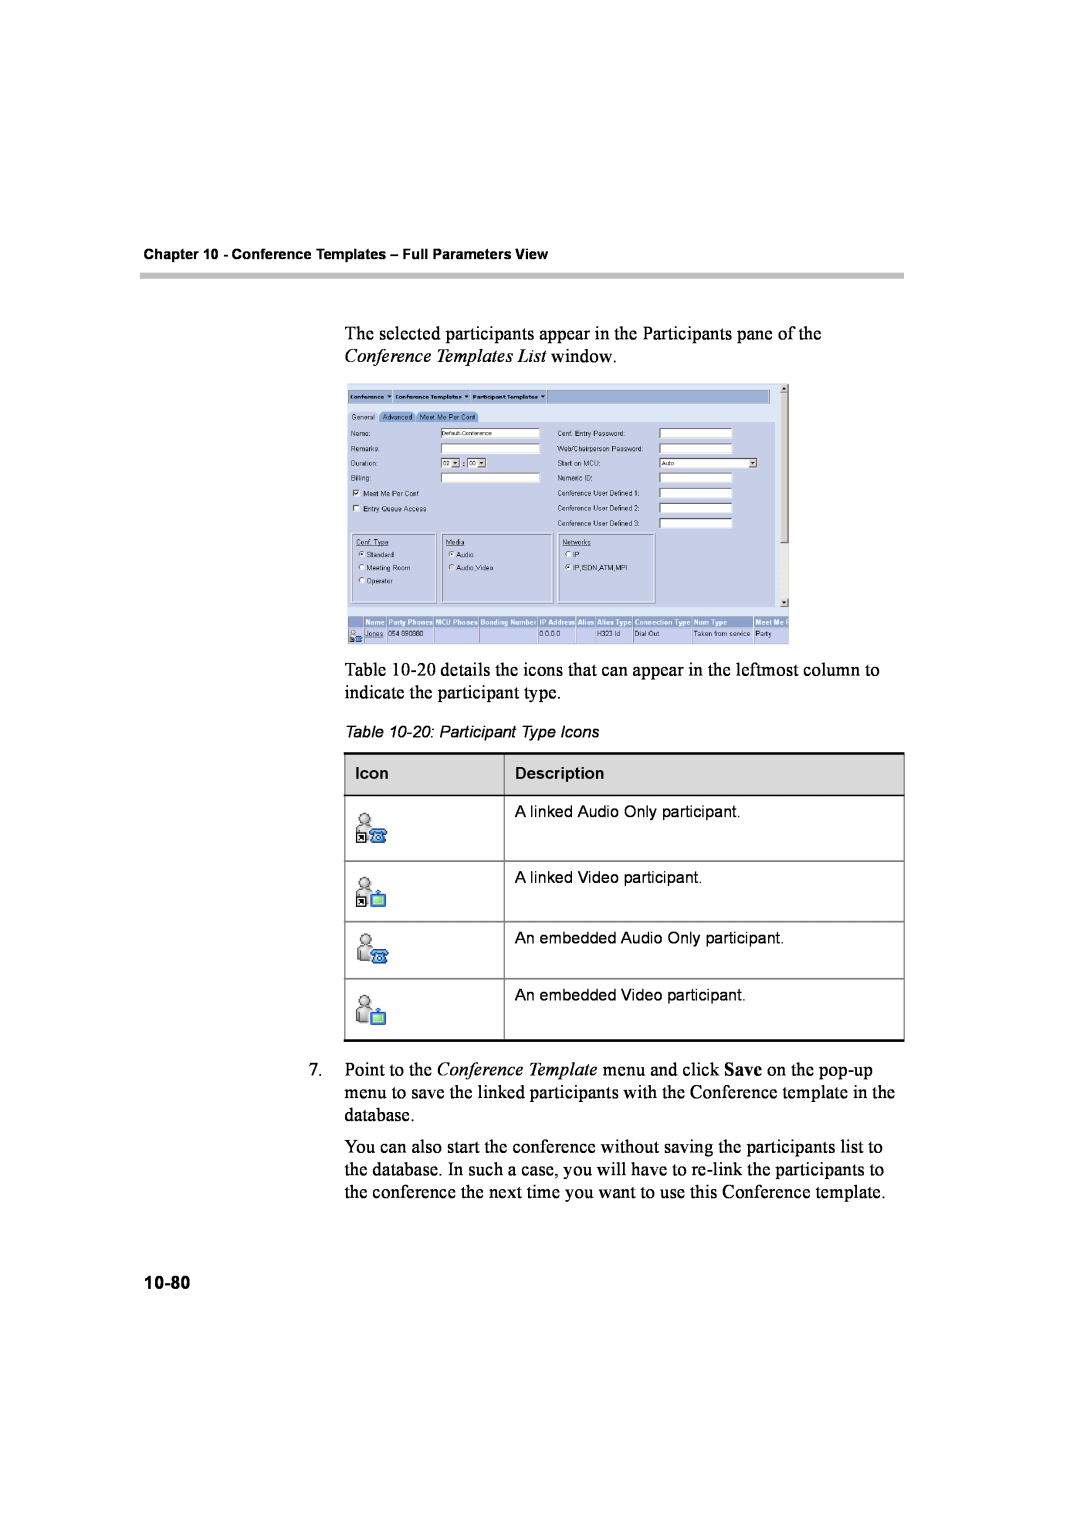 Polycom 8 manual Conference Templates List window, A linked Audio Only participant, A linked Video participant 